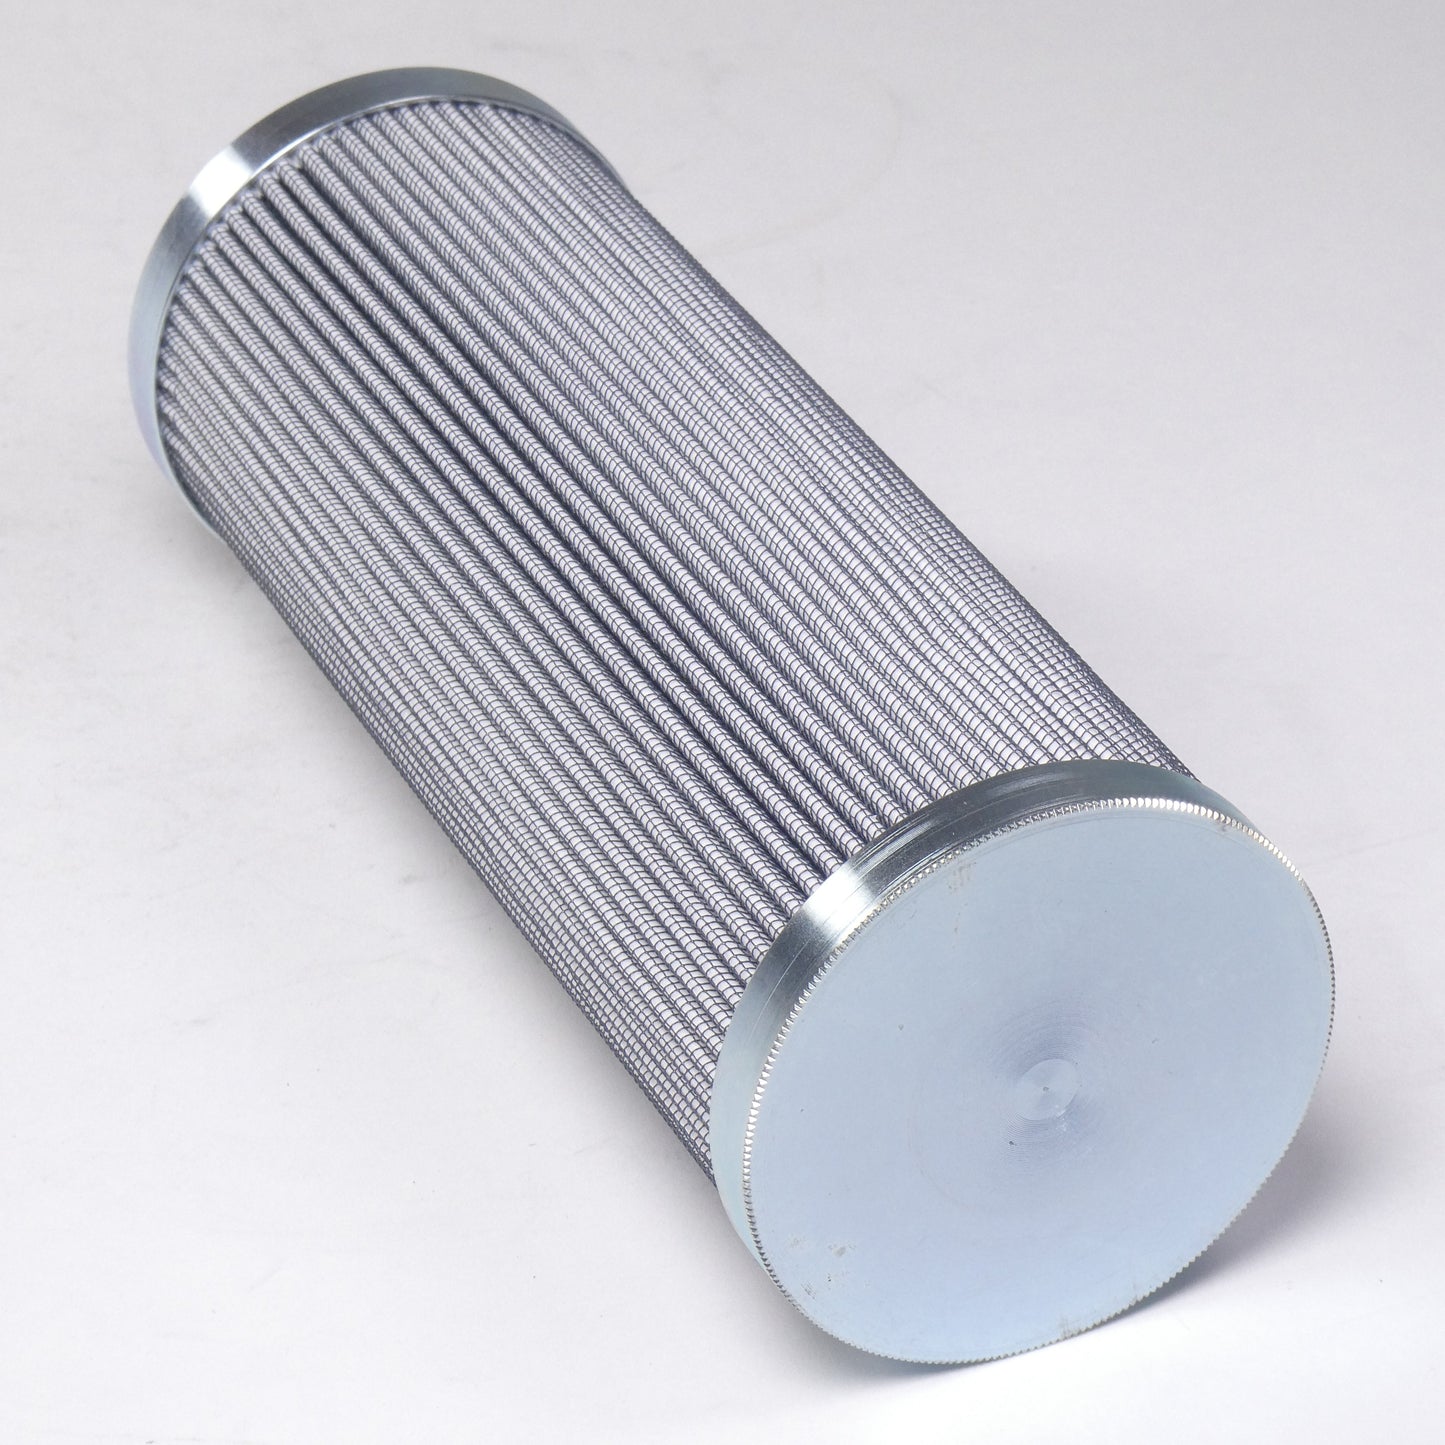 Hydrafil Replacement Filter Element for Hydac 1.11.04D10BH/-V